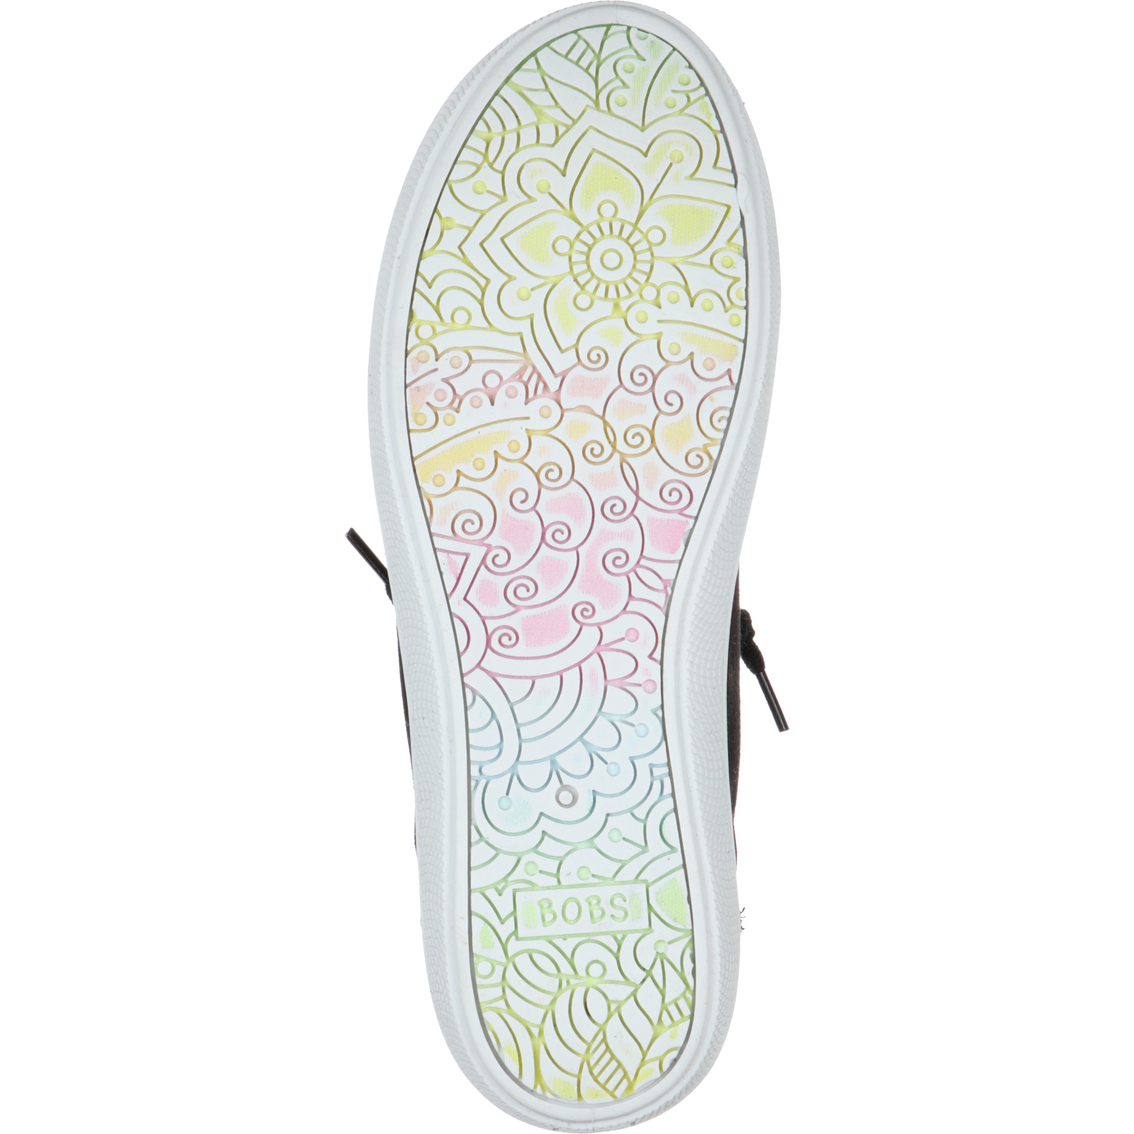 BOBS from Skechers Women's Bobs B Cute Sneakers - Image 5 of 5